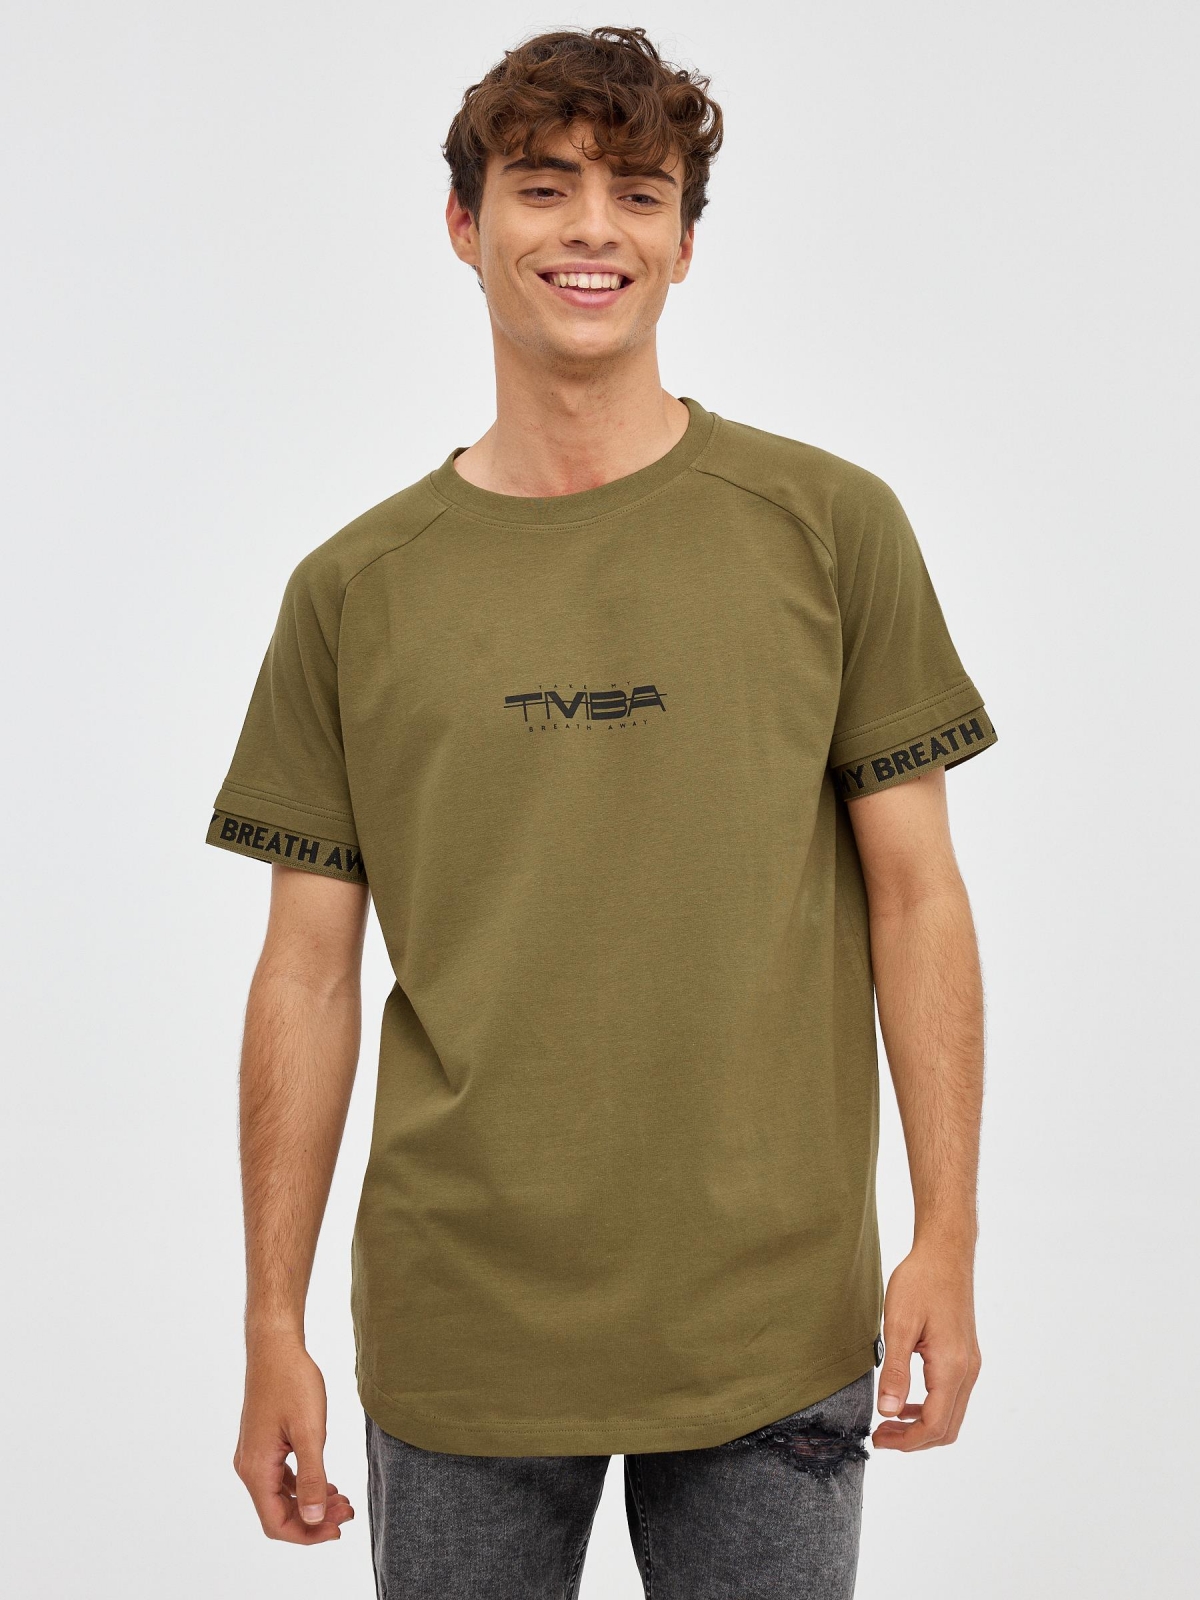 Breath Away T-shirt khaki middle front view